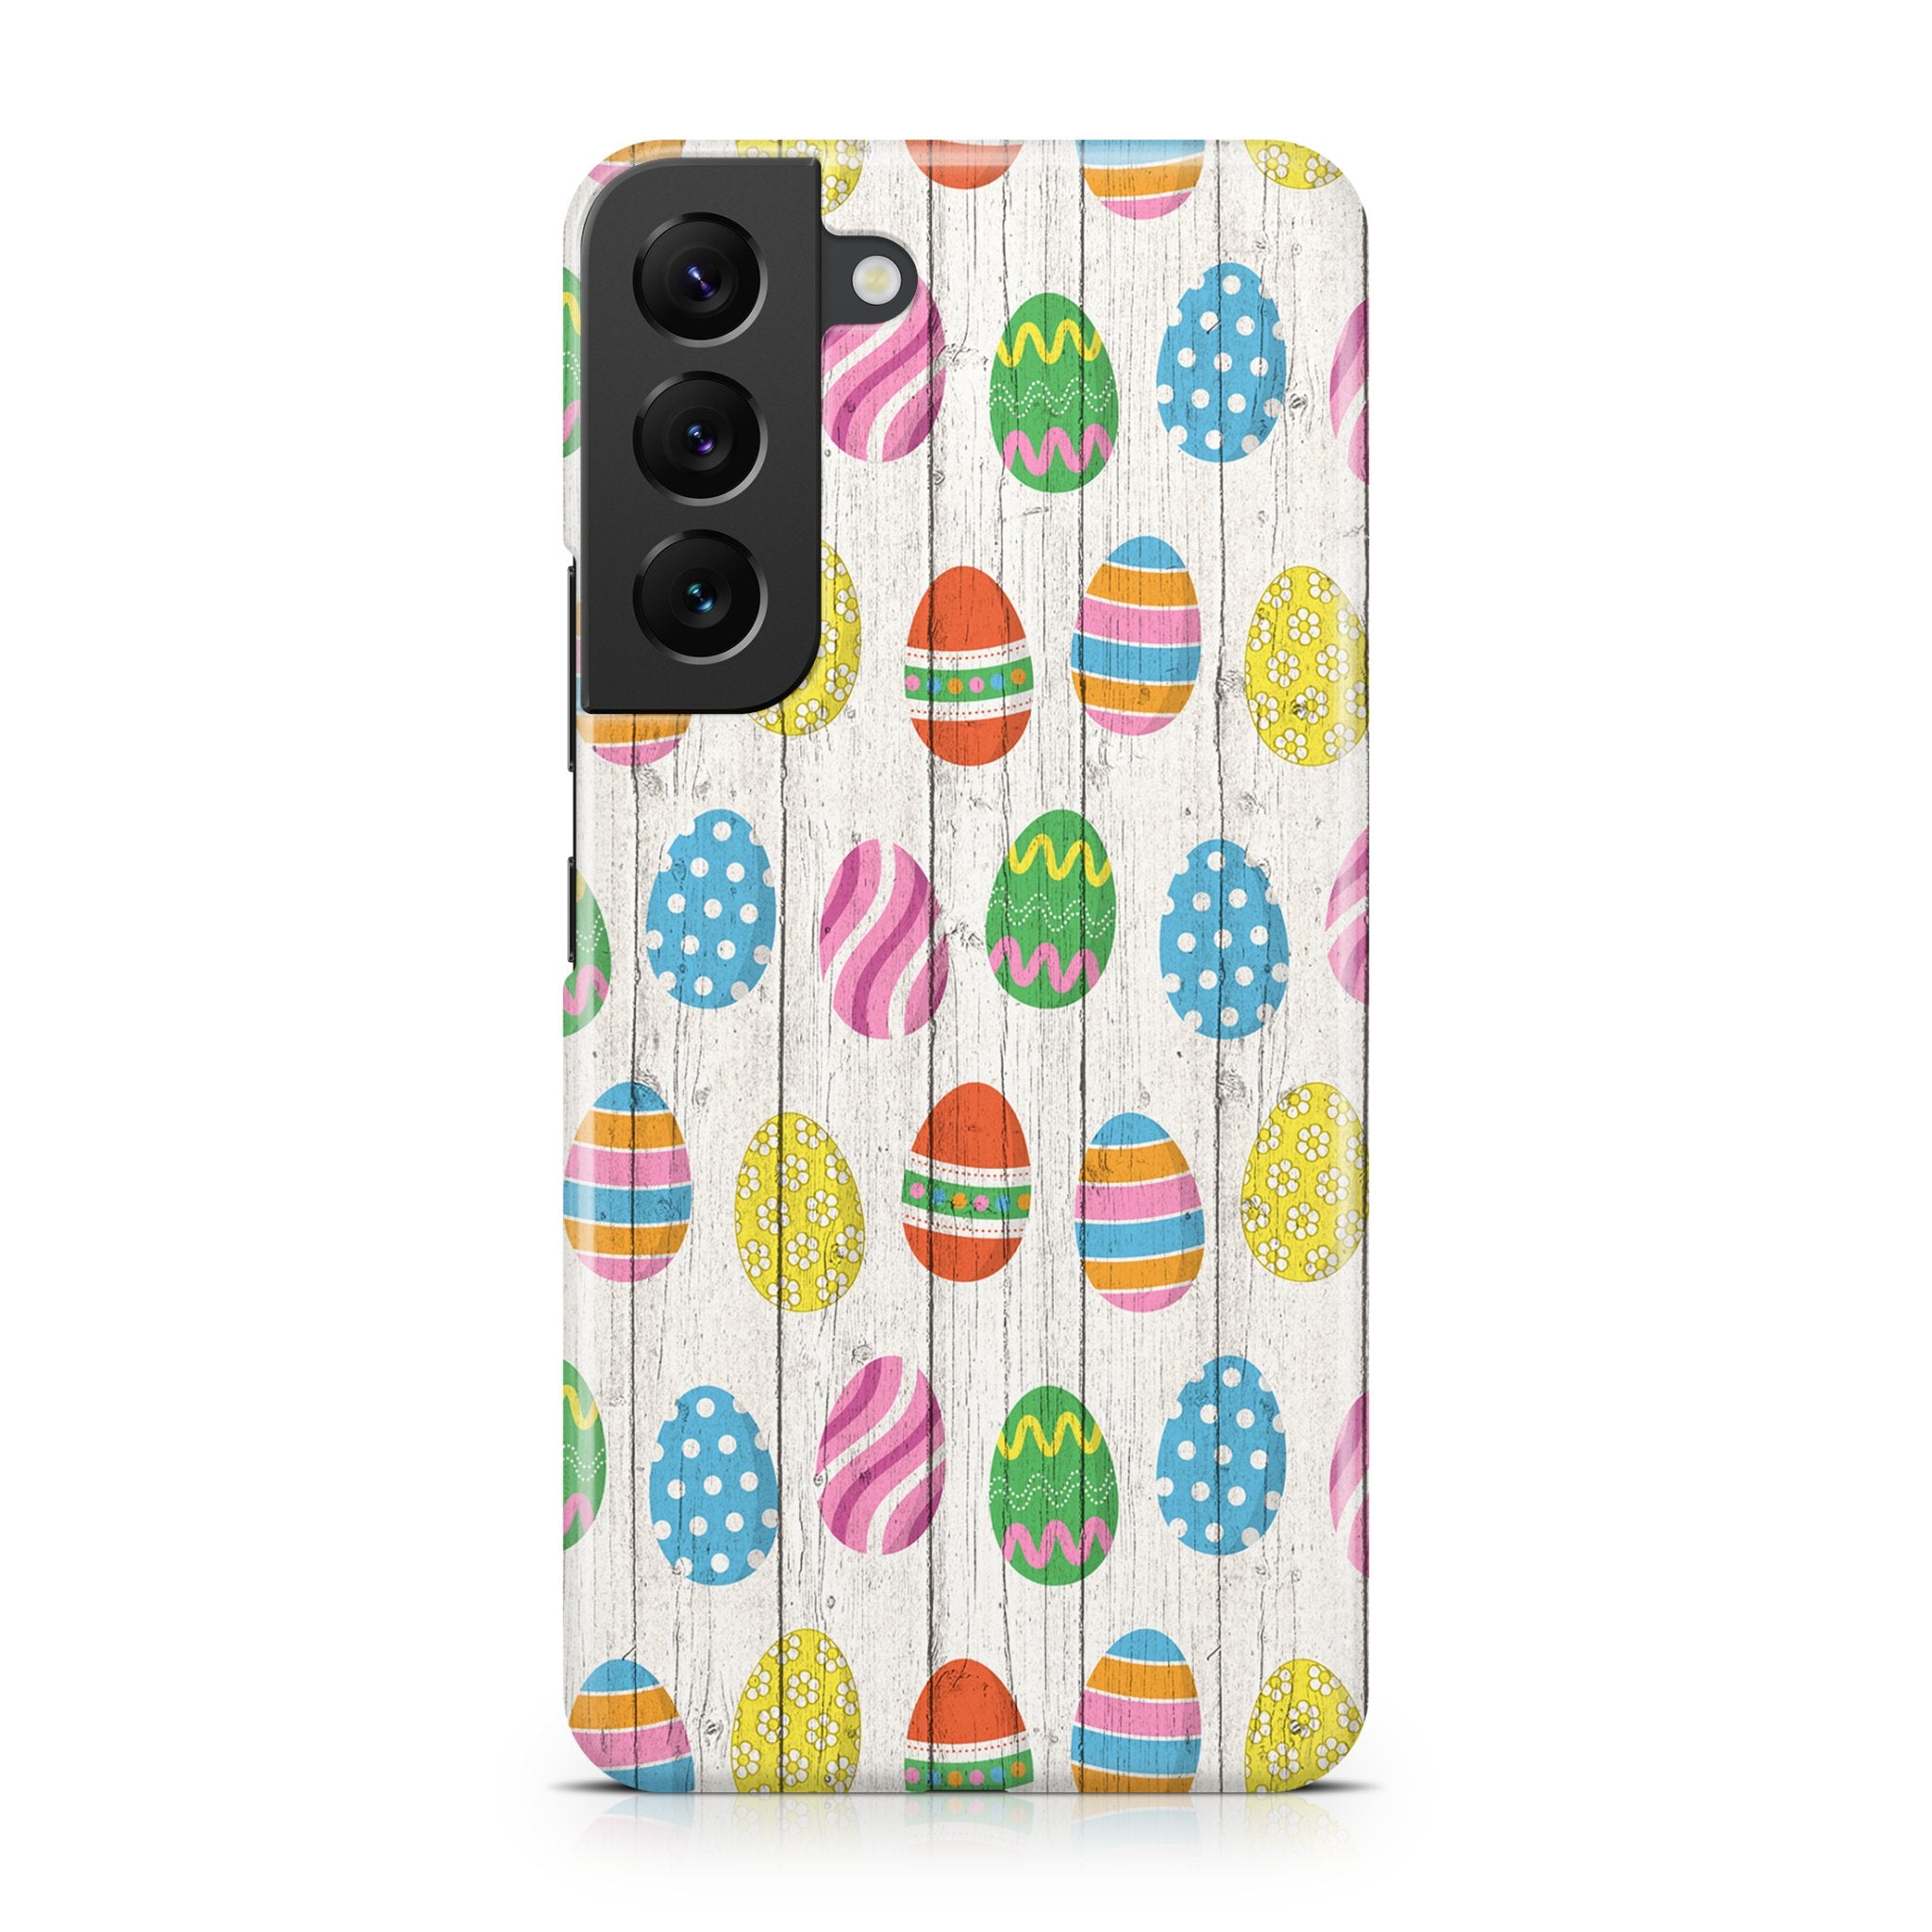 Colored Easter Eggs - Samsung phone case designs by CaseSwagger